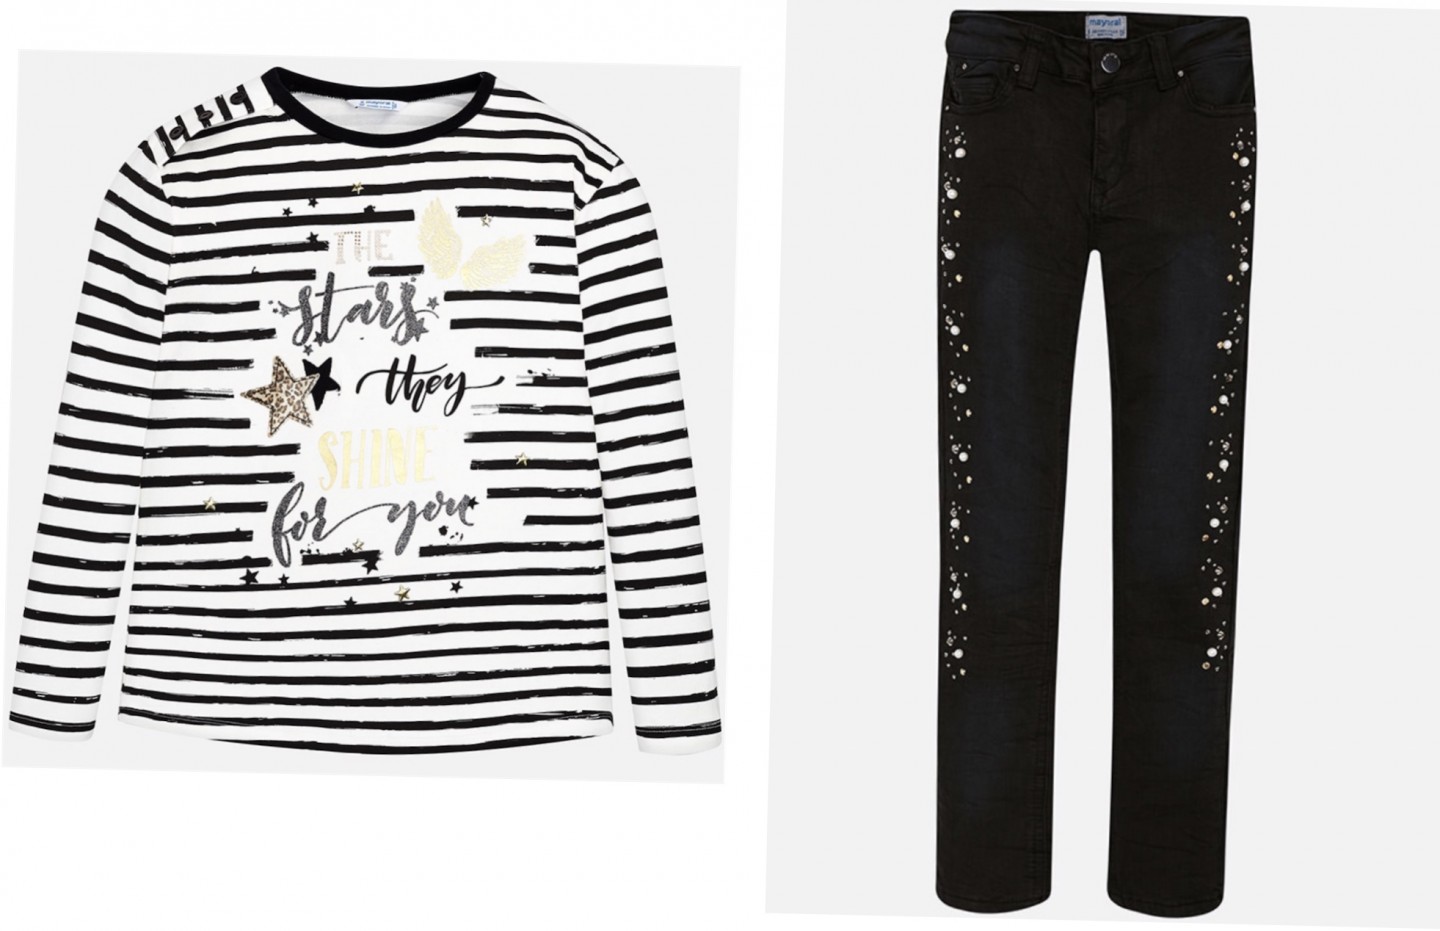 MAYORAL 7058 THE STARS THEY SHINE SHIRT AND LONG TROUSERS WITH APPLIQUÉS 